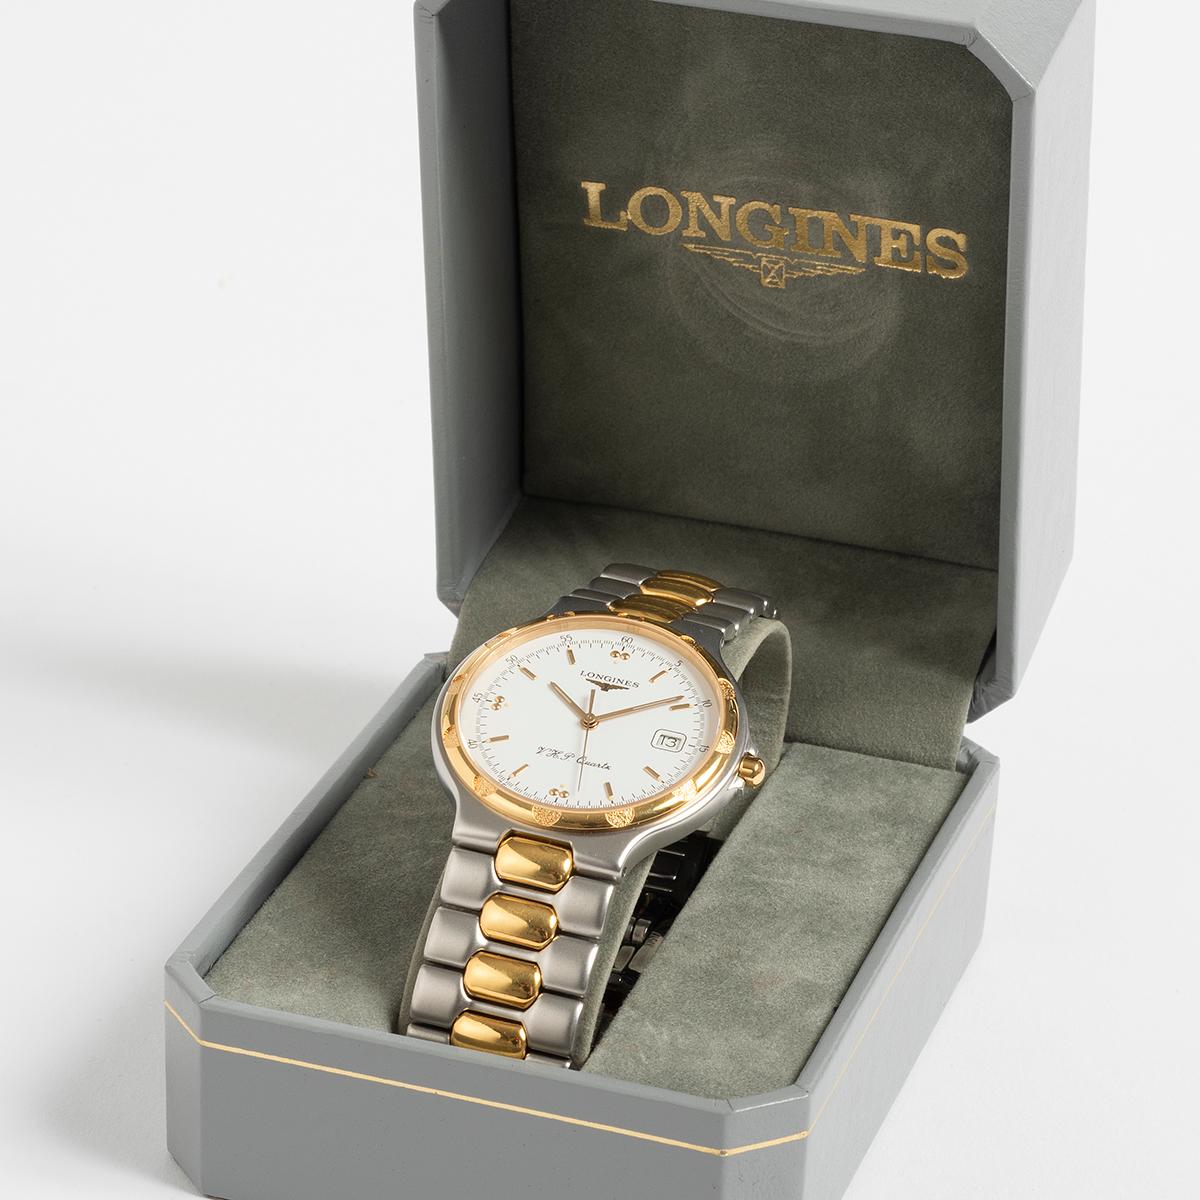 Our neo vintage Longines Conquest VHP features a stainless steel/ gold plated 35mm case and bracelet. Of note, this reference, 21601-01 was considered one of the stand out models of the Longines range in period, VHP standing for very high precision.